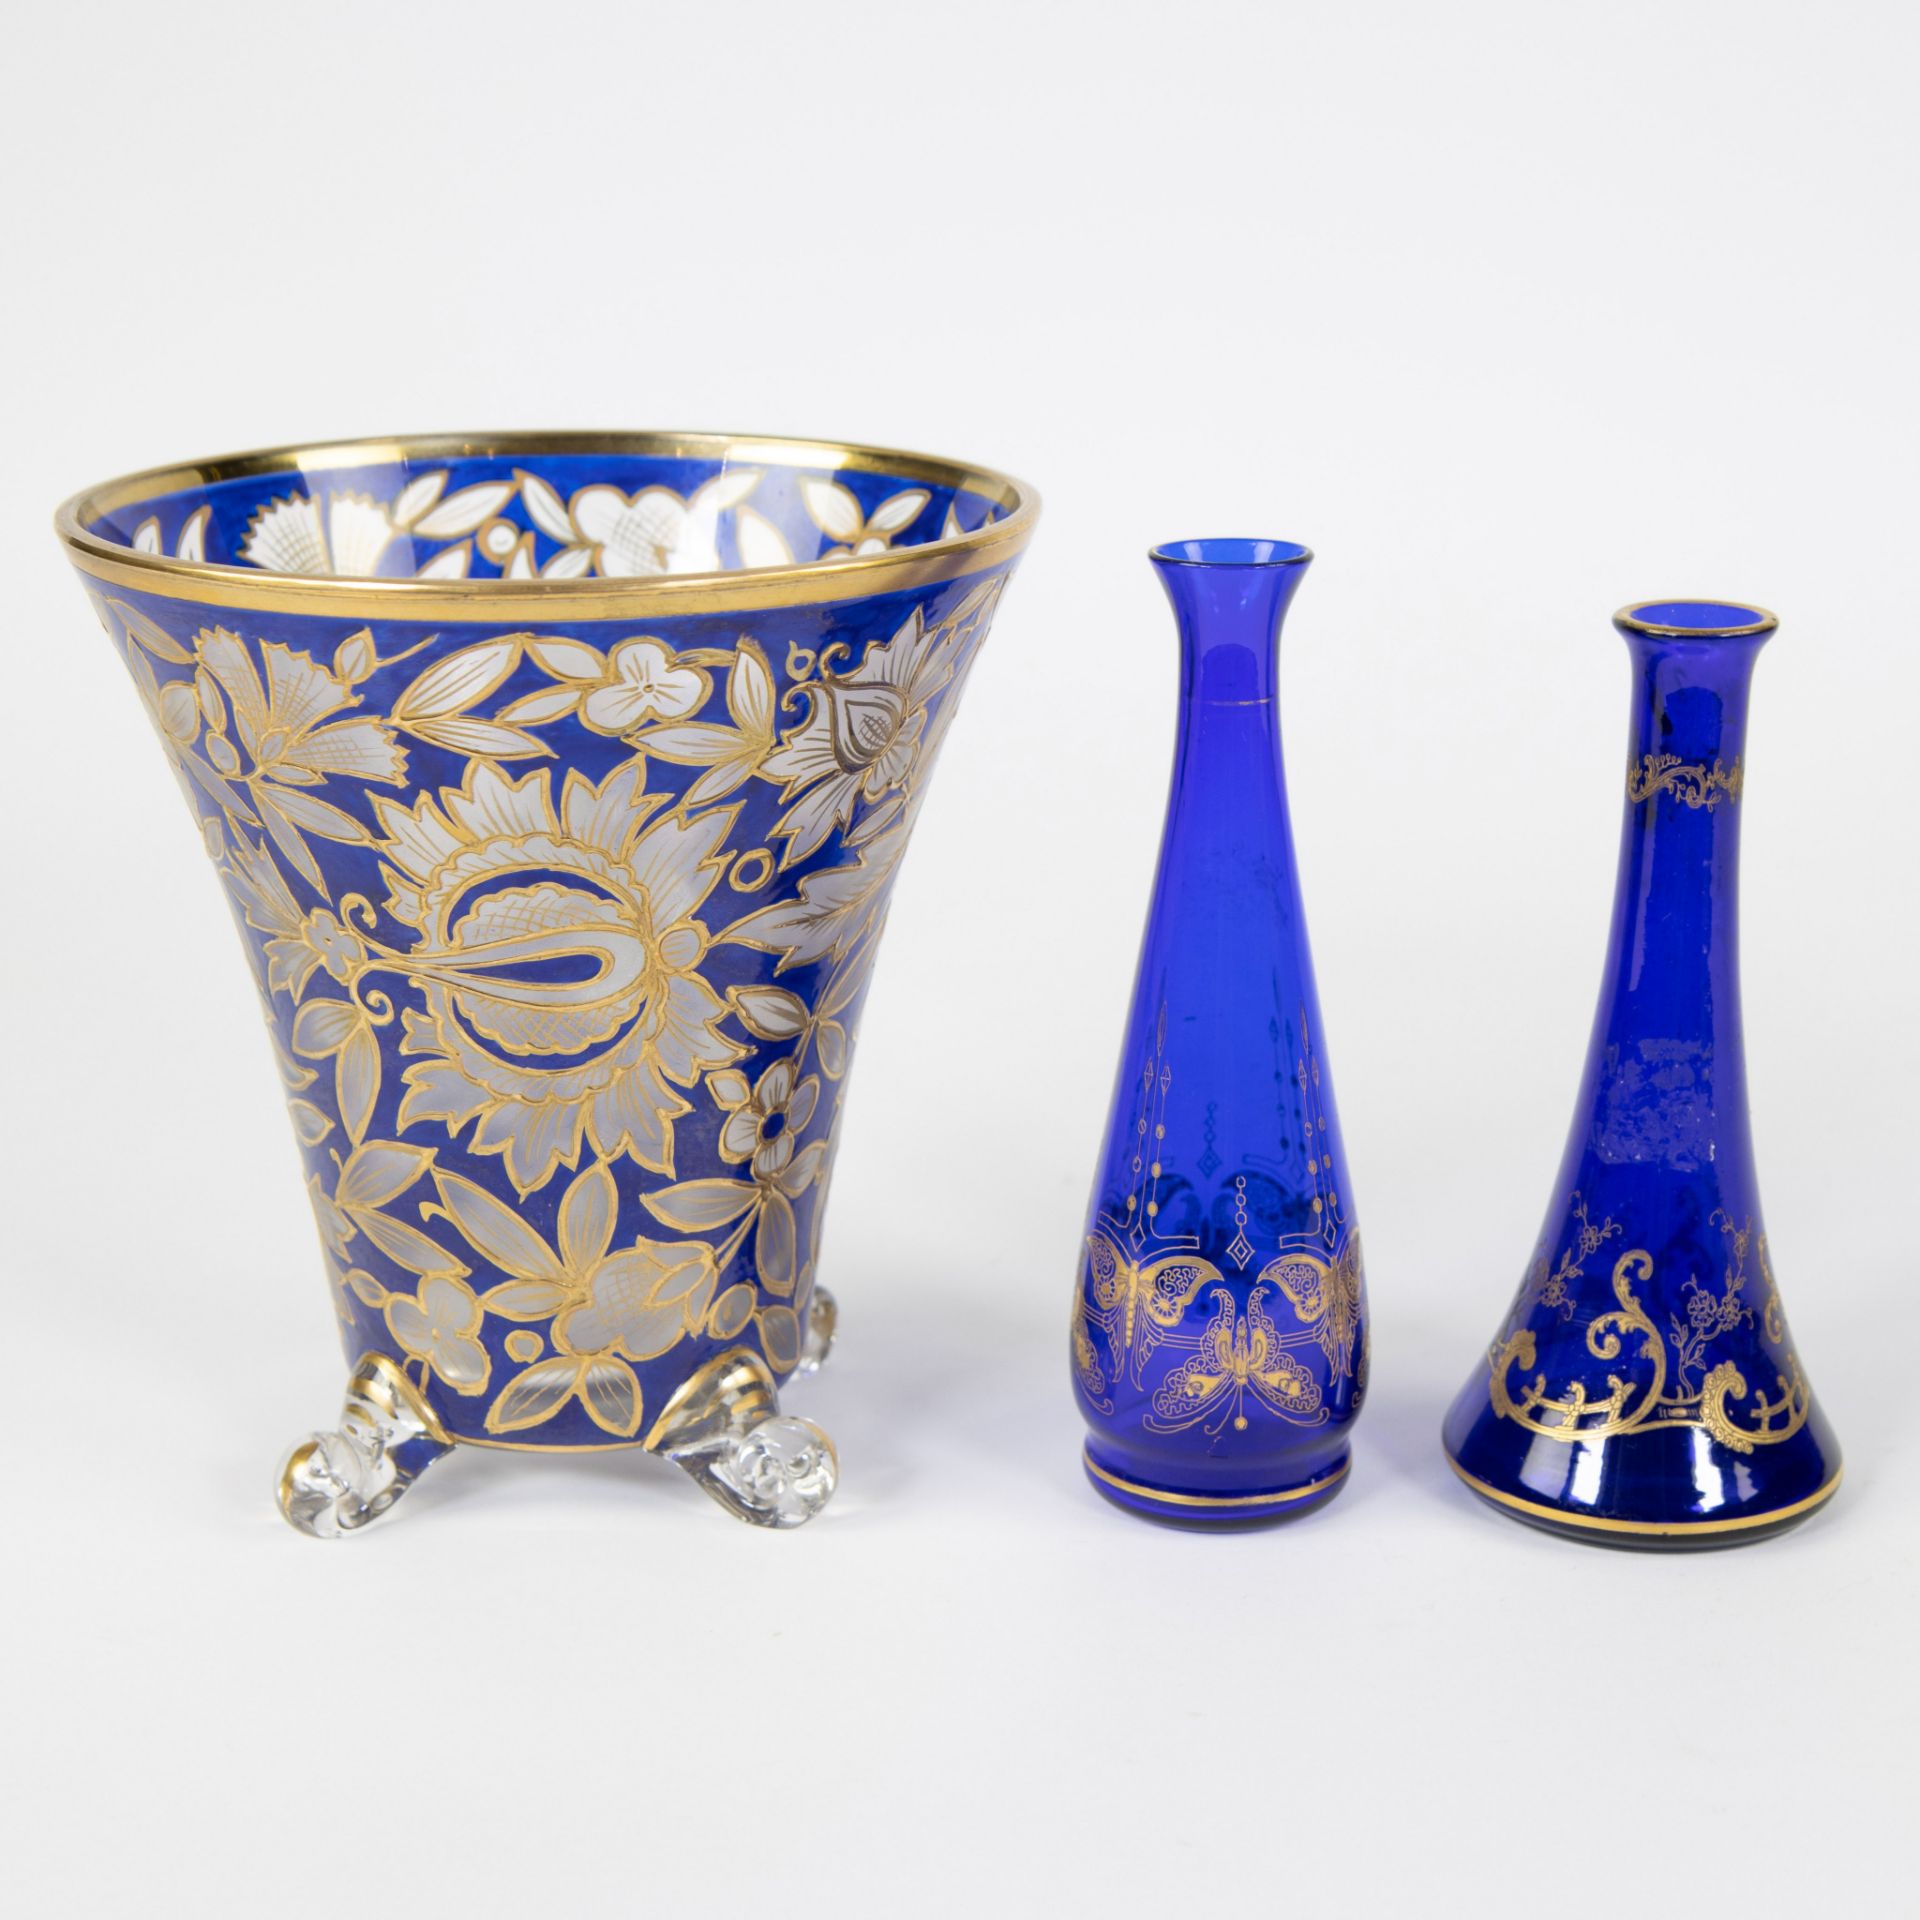 Val Saint Lambert Art Nouveau vase (2) blue with finely decorated decor and 19th century coupe with - Image 3 of 5